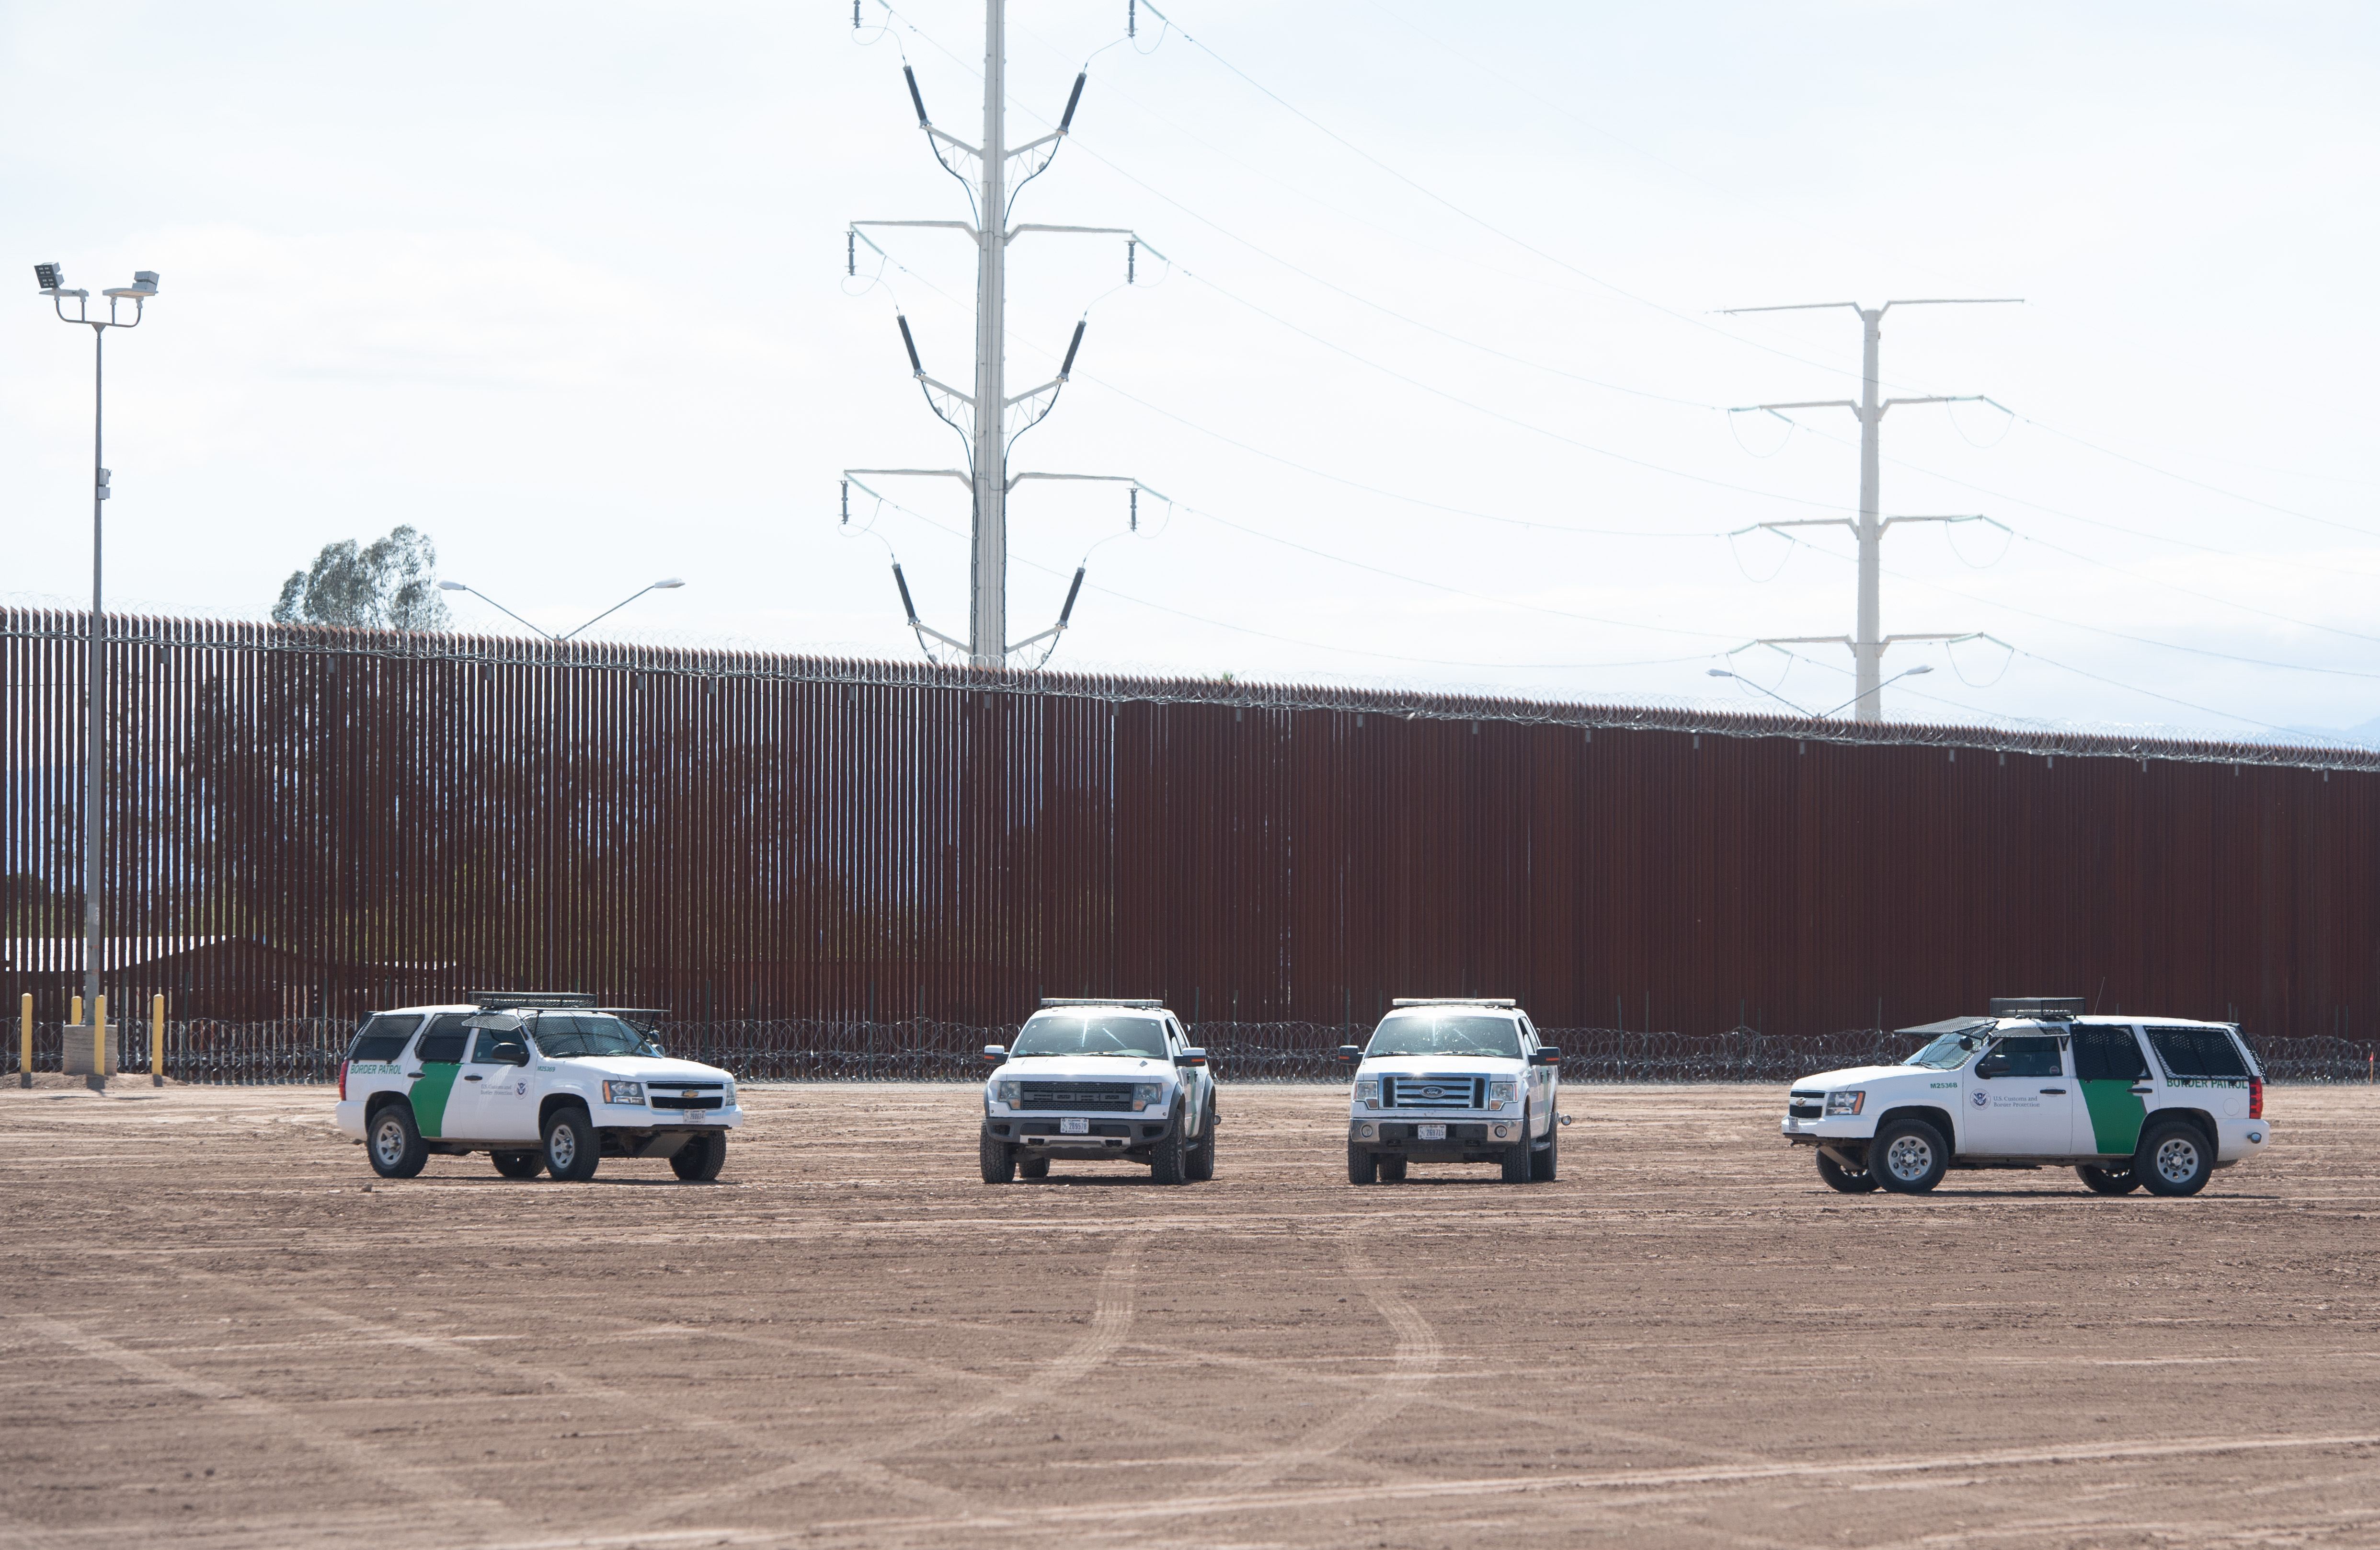 U.S. Customs and Border Patrol cars are seen near the border wall between the United States and Mexico in Calexico